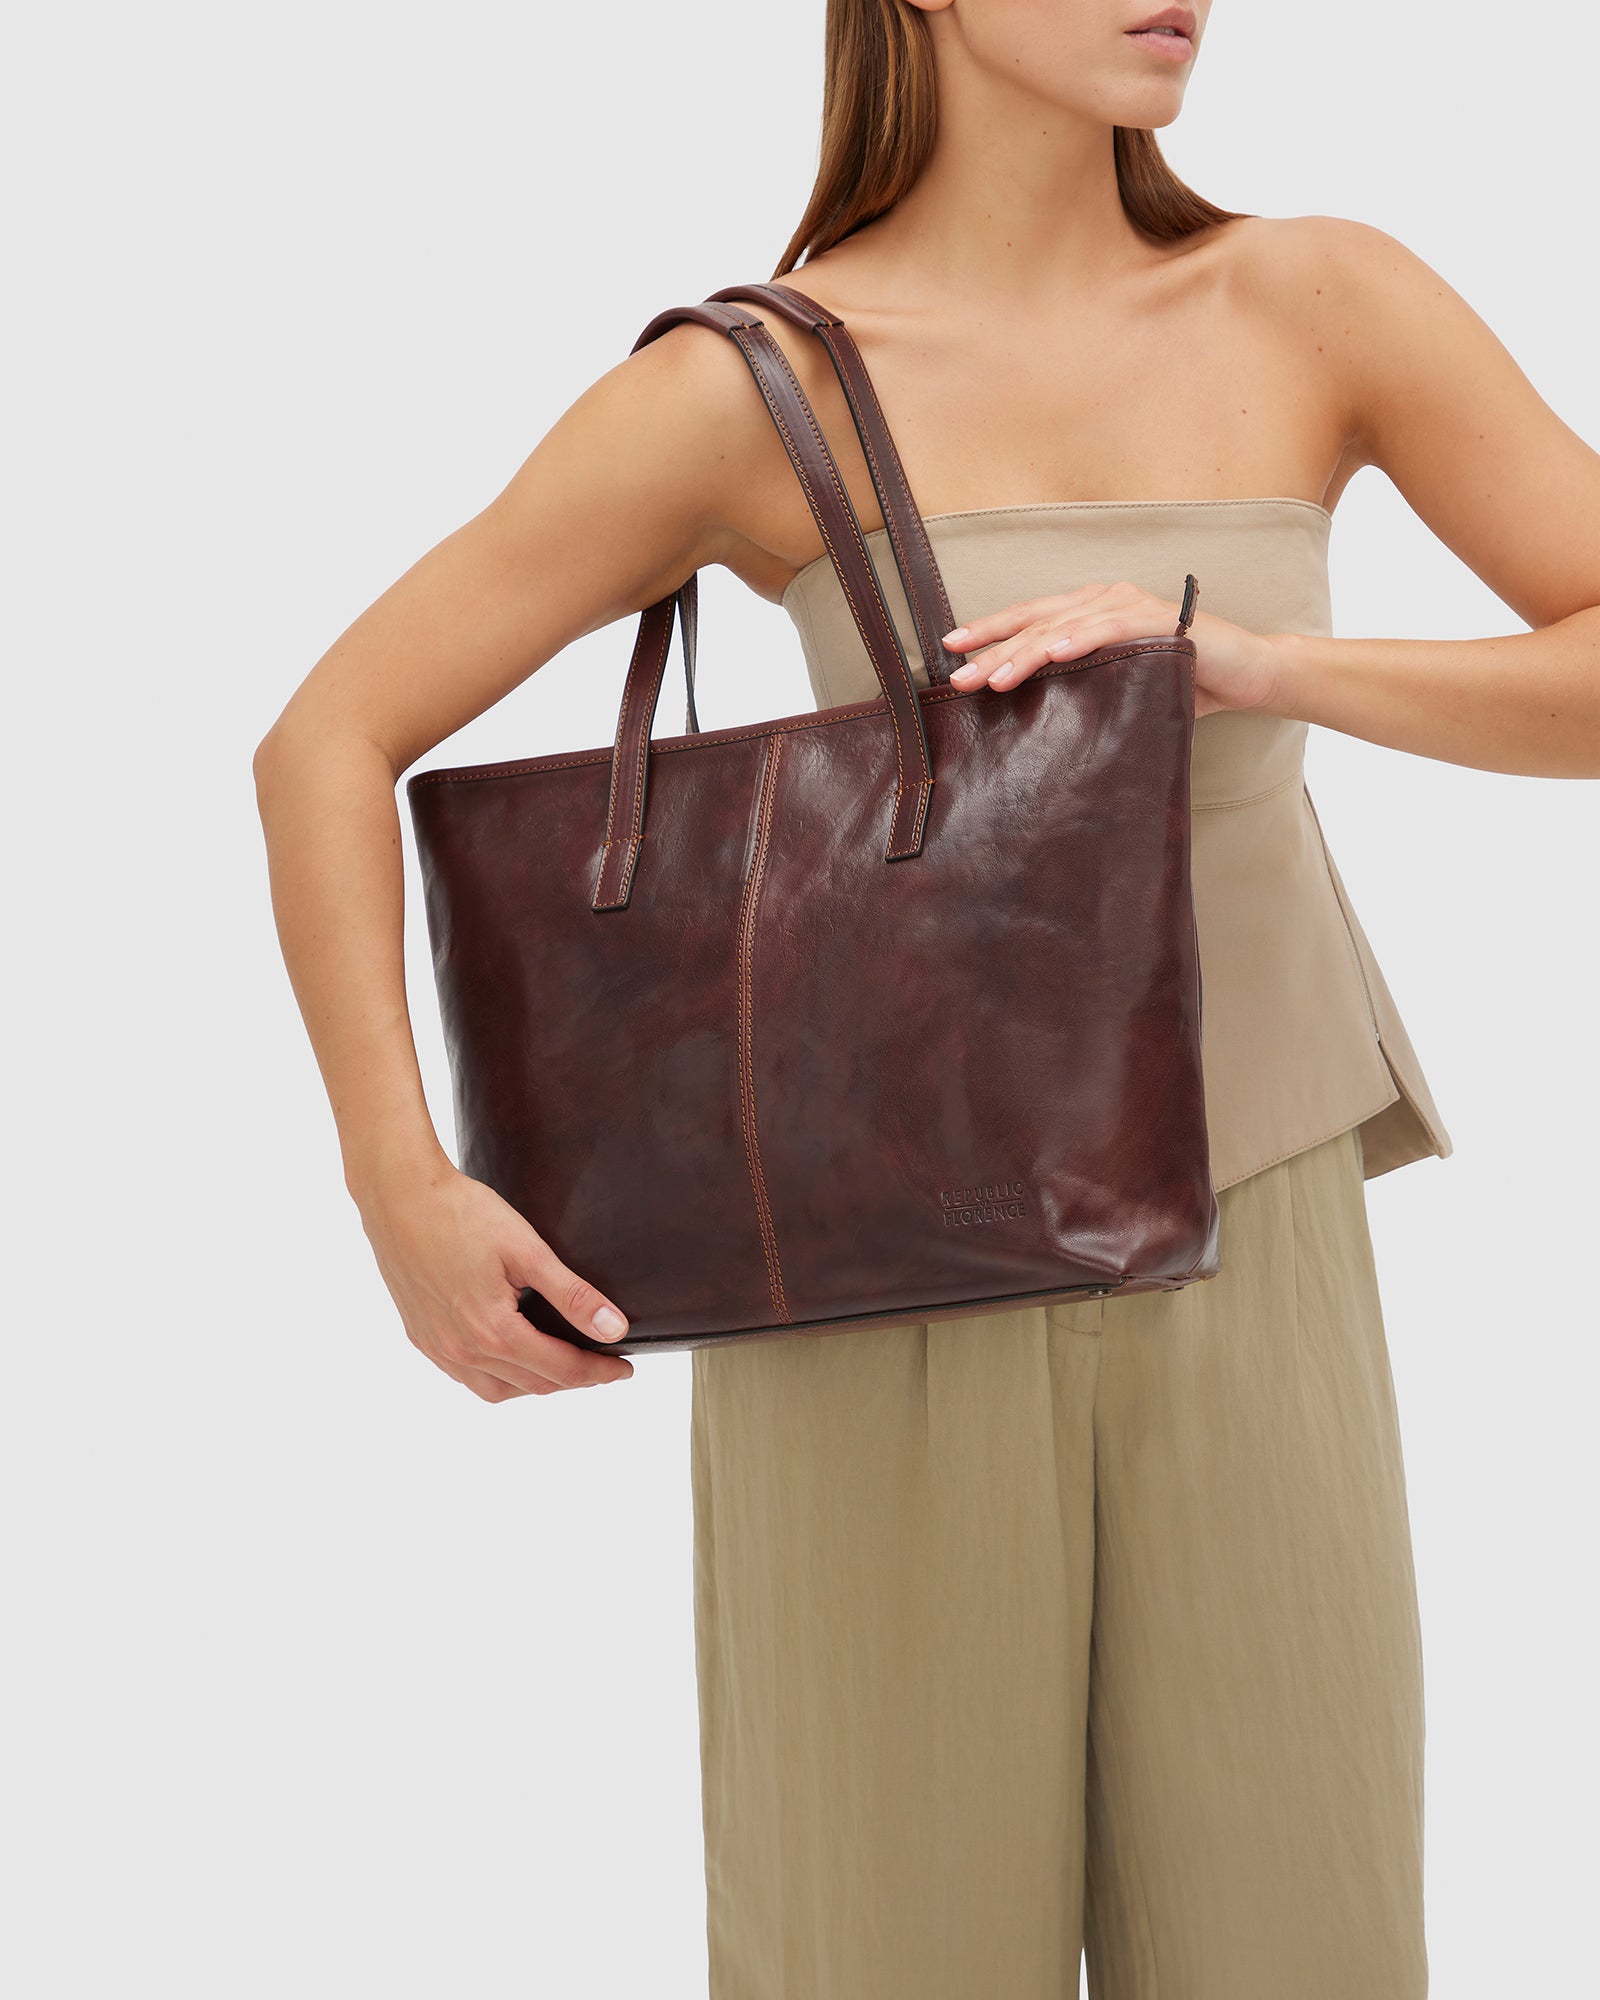 Beatrice Brown - Leather Tote / Work Bag